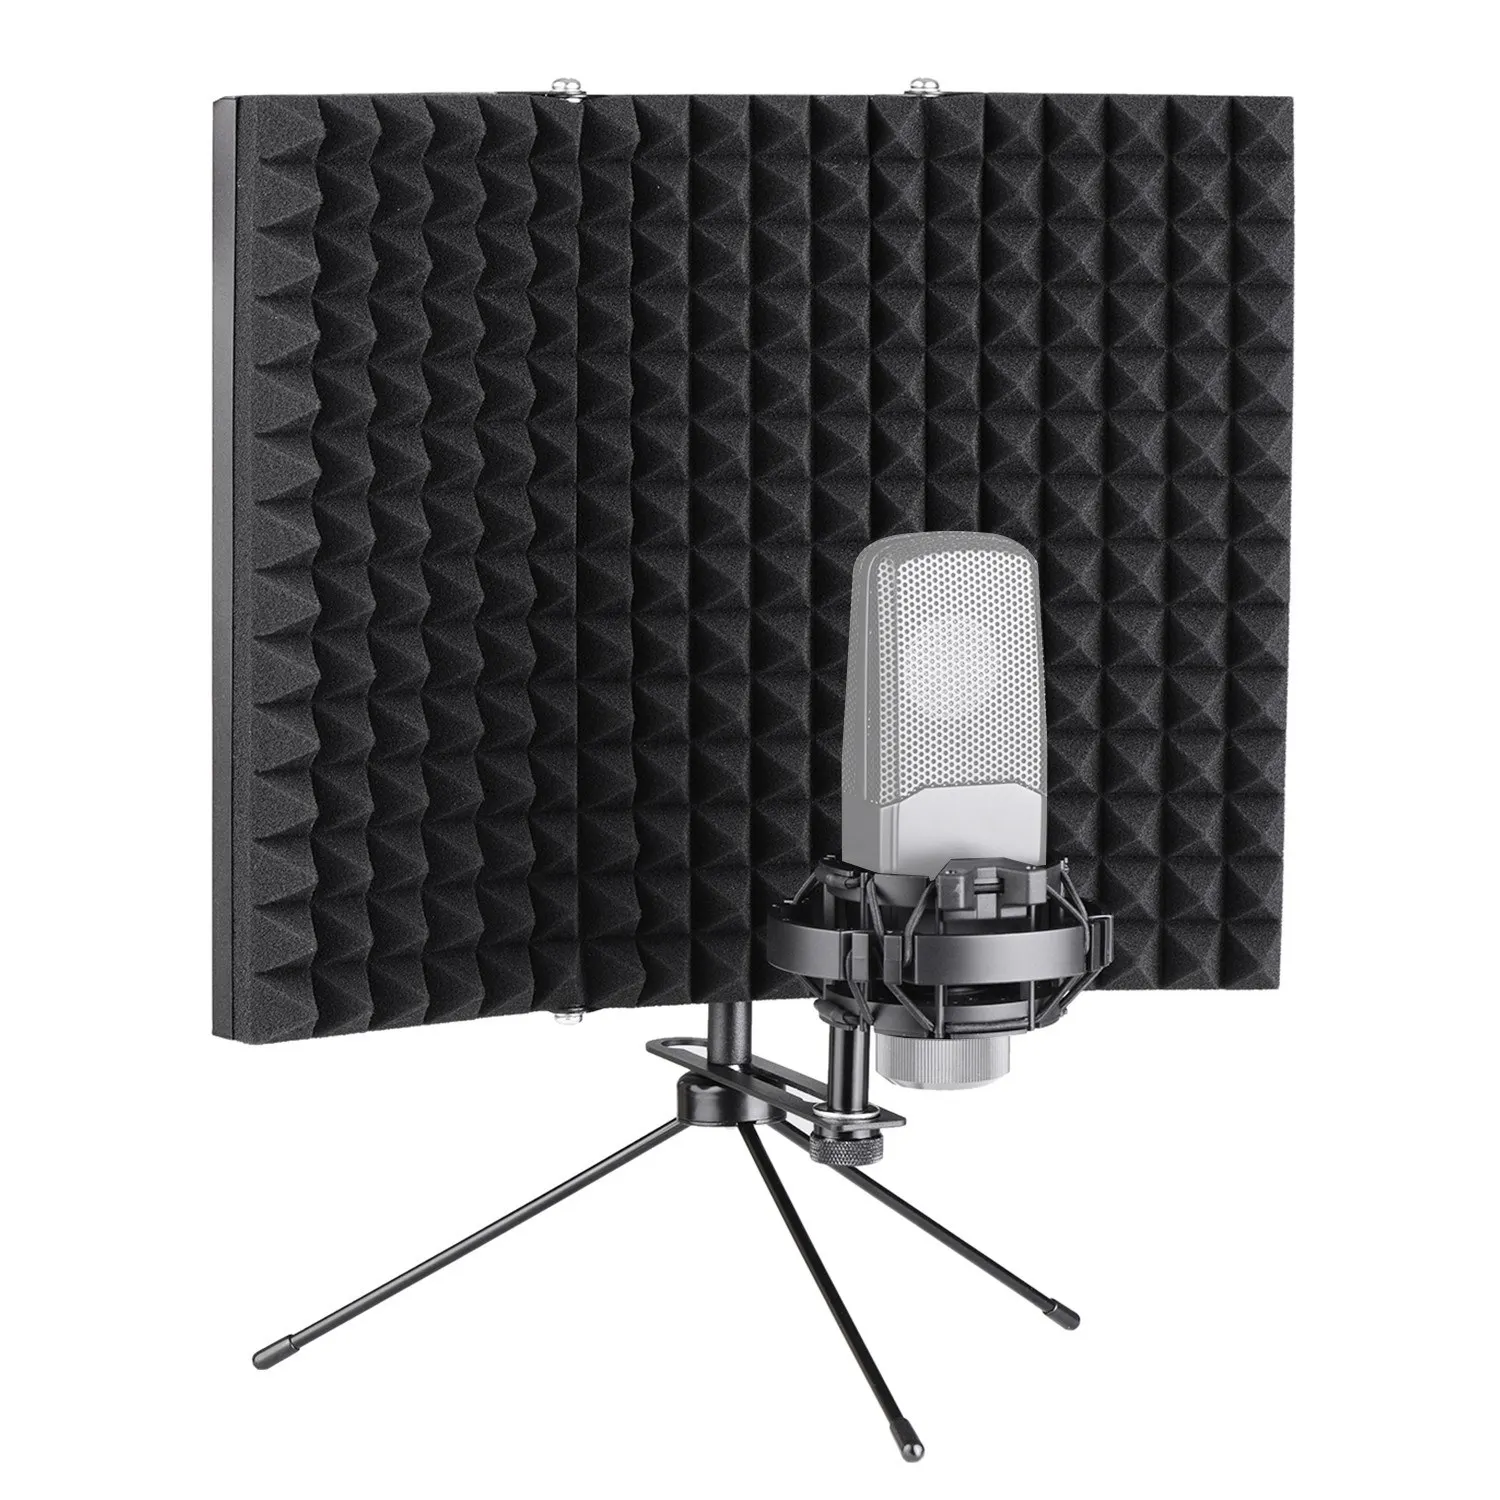 Professional Studio Recording Microphone Isolation Shield Pop Filter  Microphone Wind Screen With High Density Eva Foam - Buy Microphone  Isolation Shield,Studio Recording Microphone Isolation Shield,Microphone  Wind Screen Product on 